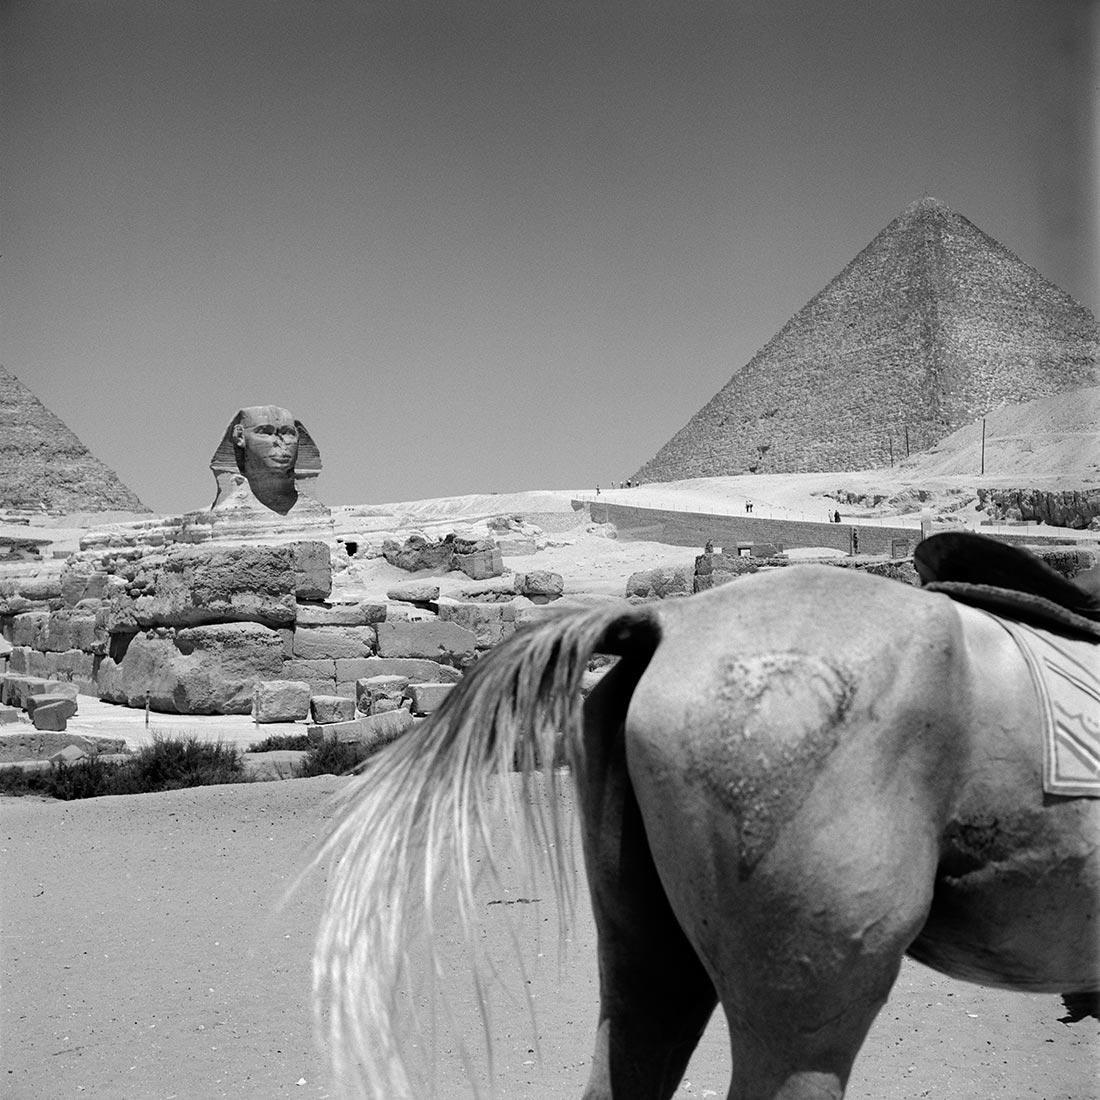 The Sphinx of Giza and the pyramid of Khufu, 1959. Egypt